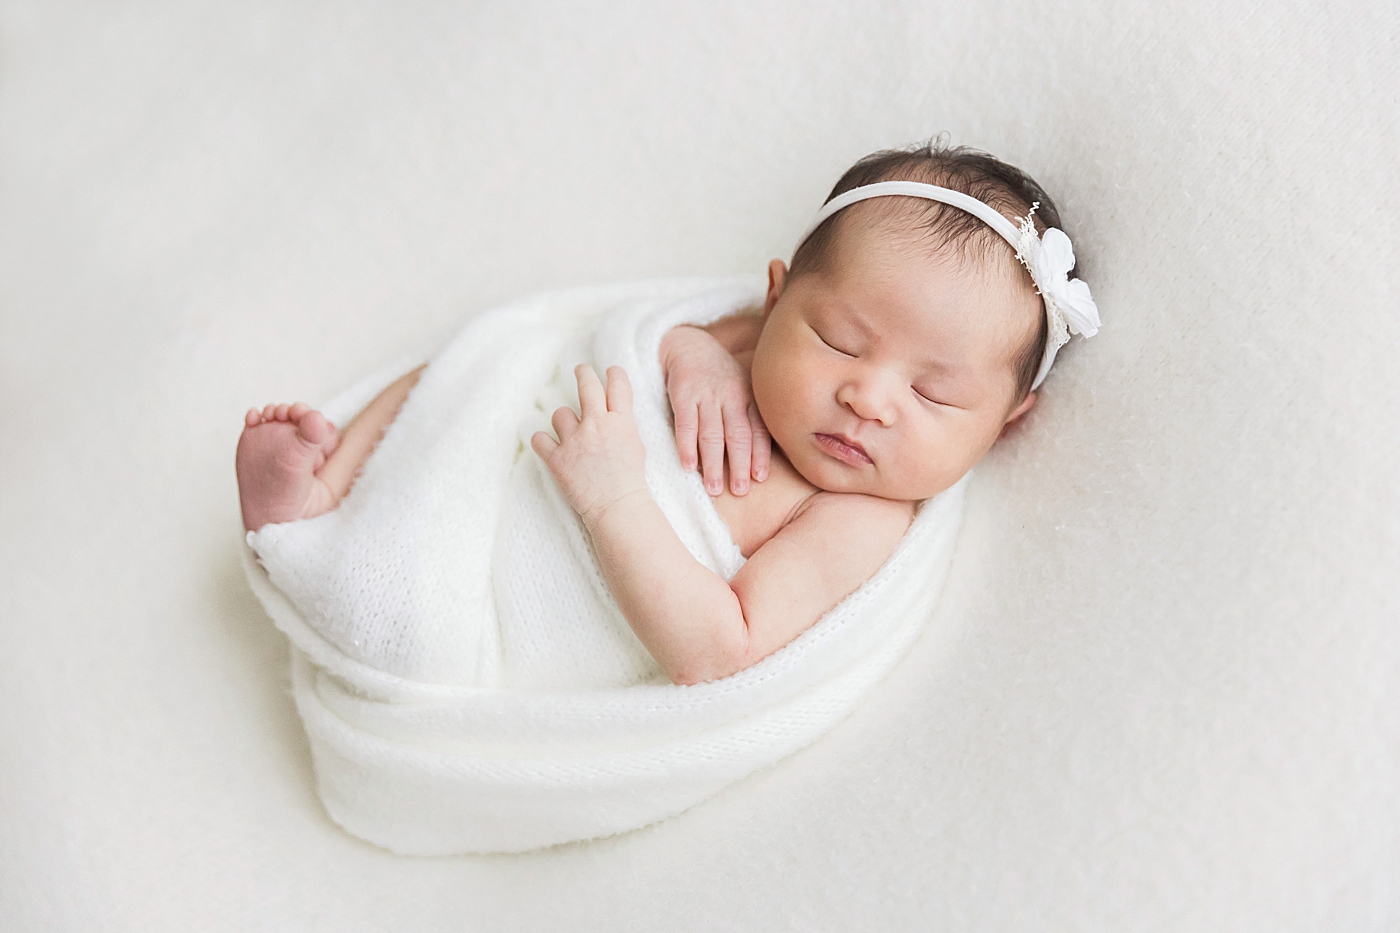 Classic newborn photo of baby girl swaddled in white. Photo by Fresh Light Photography.